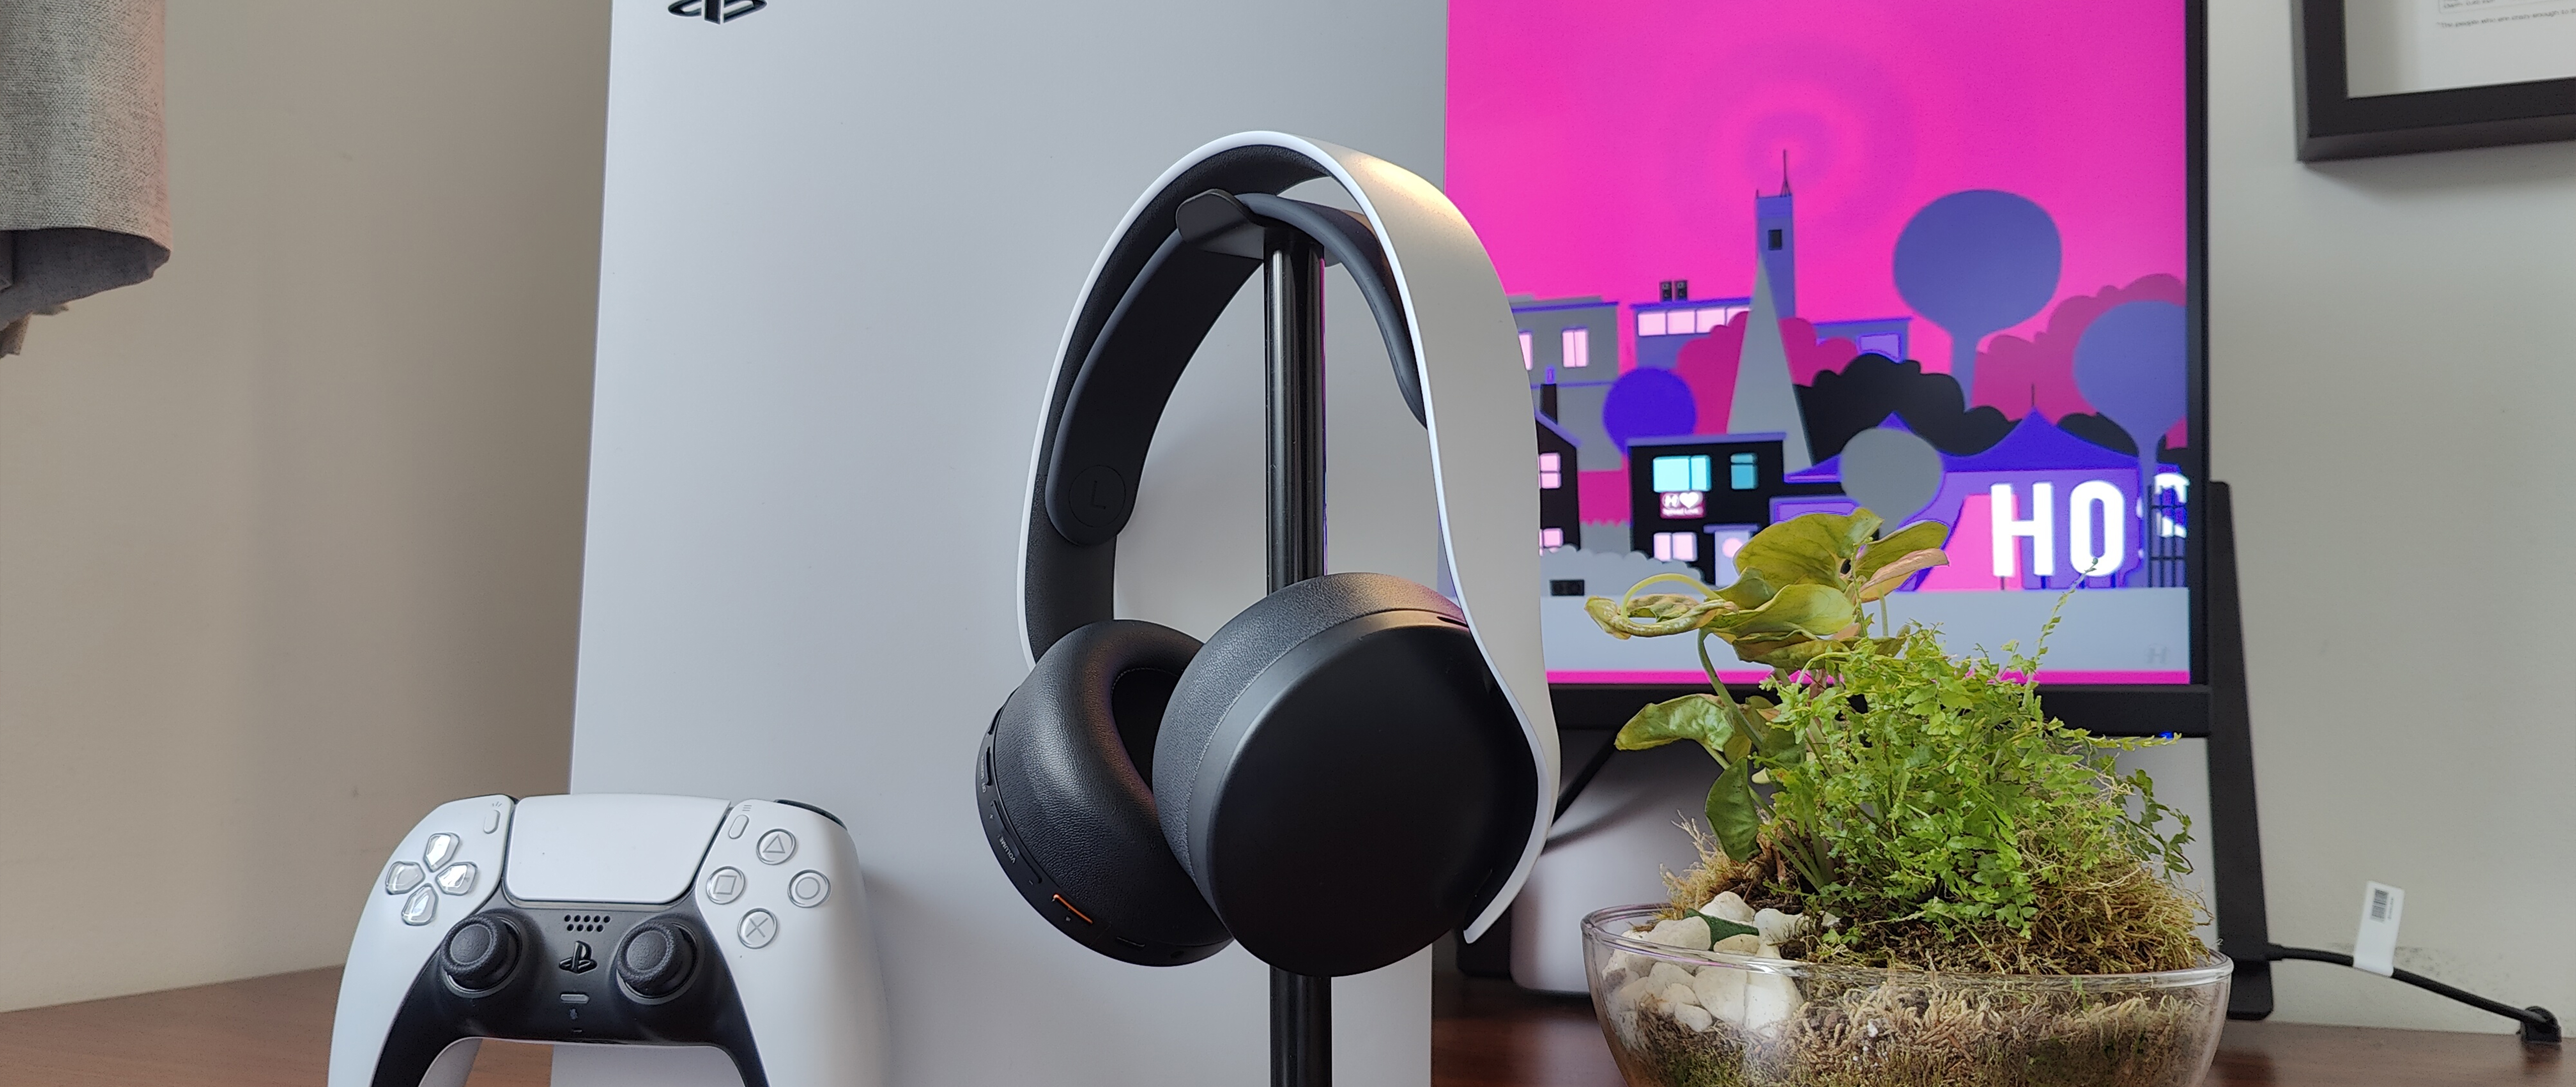 spleet mei Nauwgezet Pulse 3D PS5 wireless headset review: The only choice | Laptop Mag